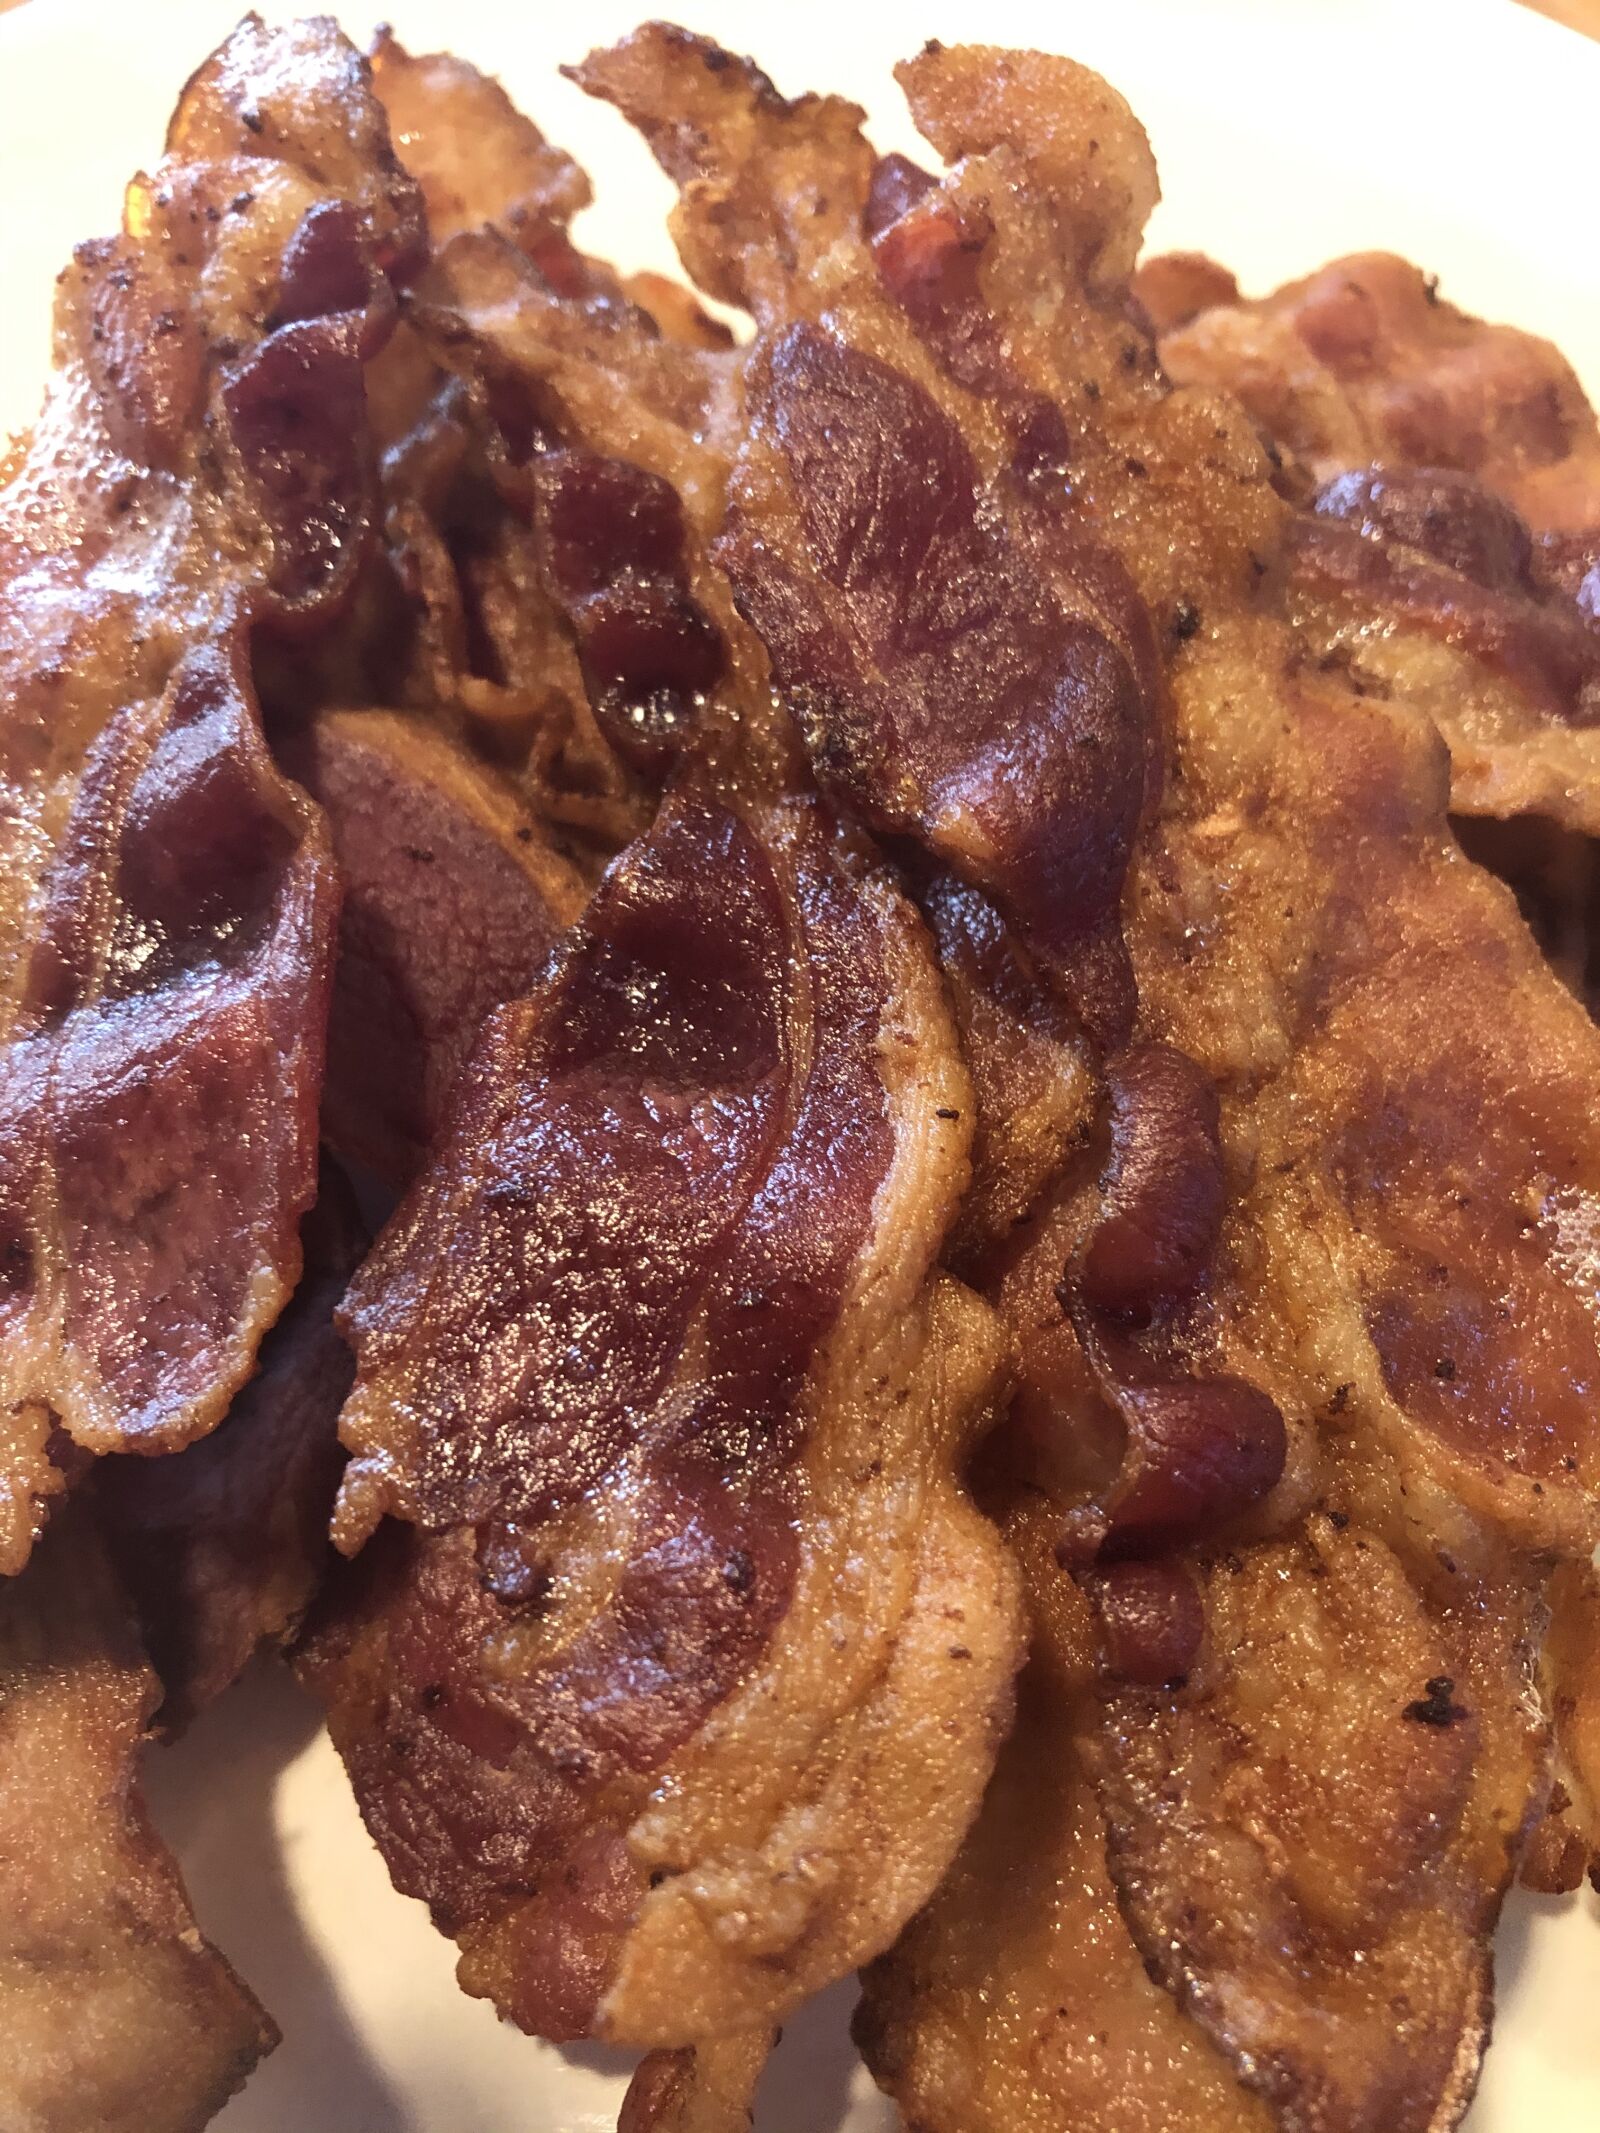 Apple iPhone 8 sample photo. Bacon, tempting, food photography